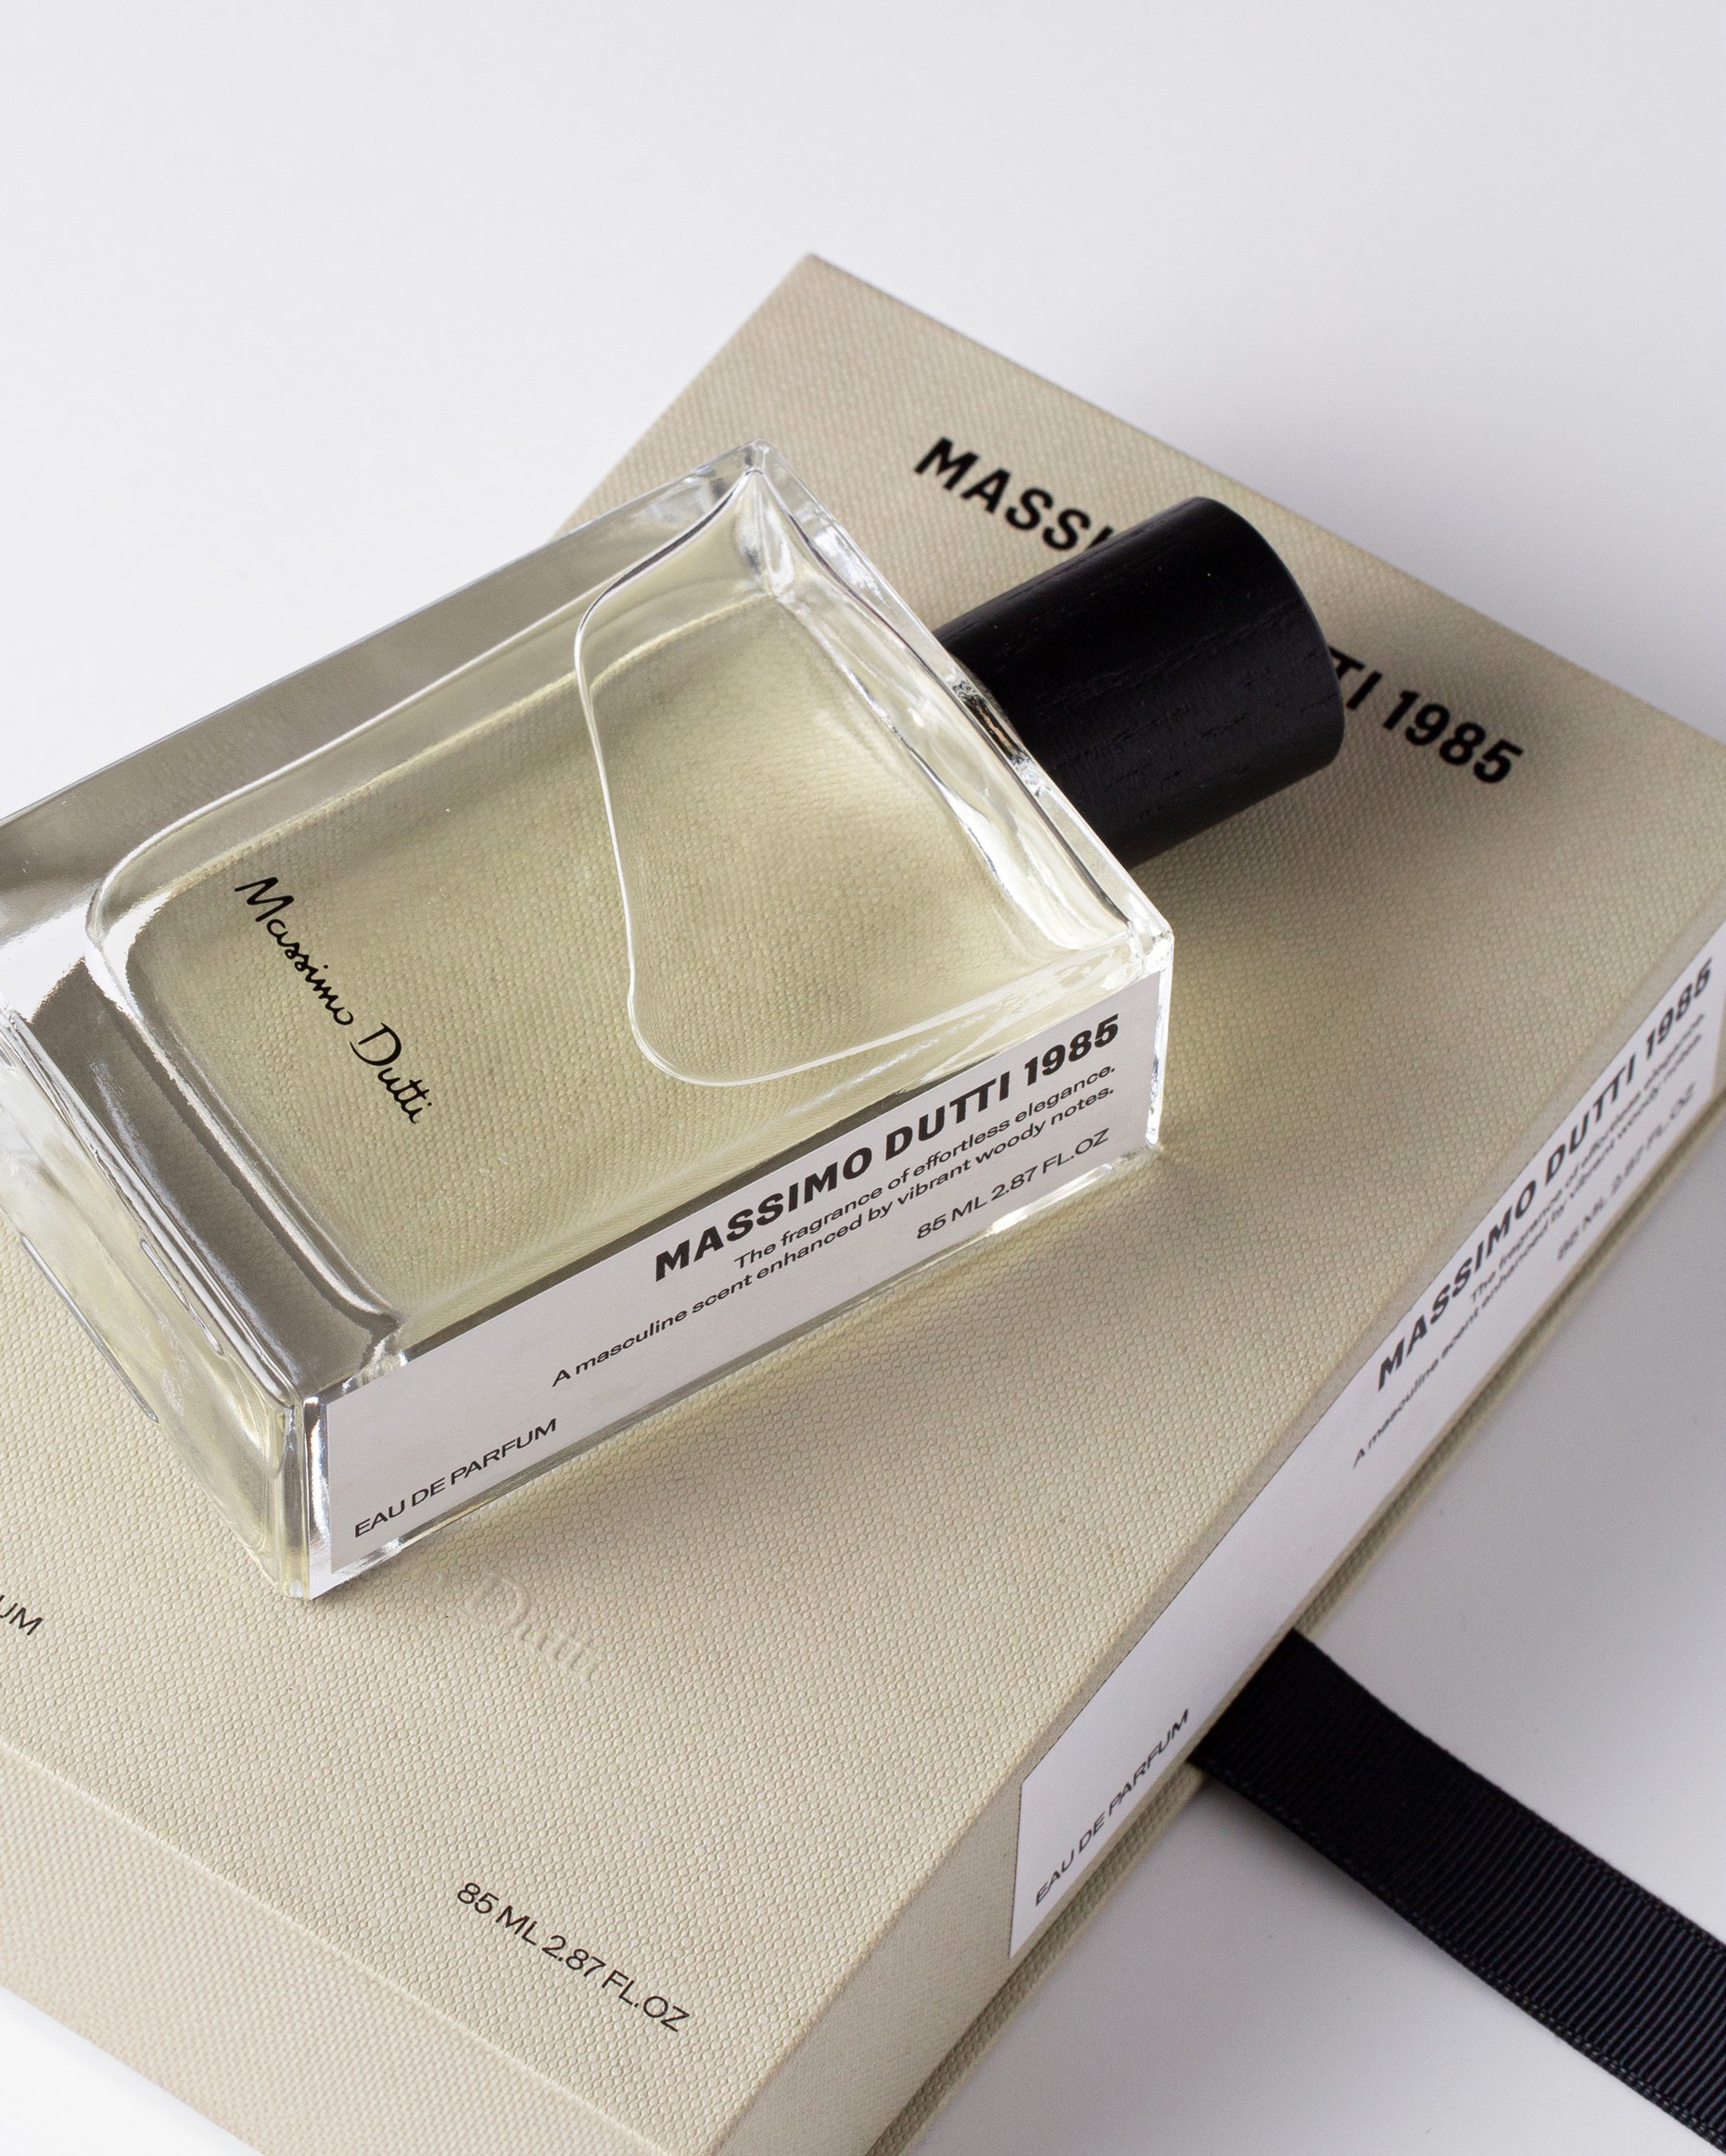 Fresh Design Meets Classic Elegance in Men’s Fragrance for Massimo Dutti 1985, Designed by Lavernia & Cienfuegos